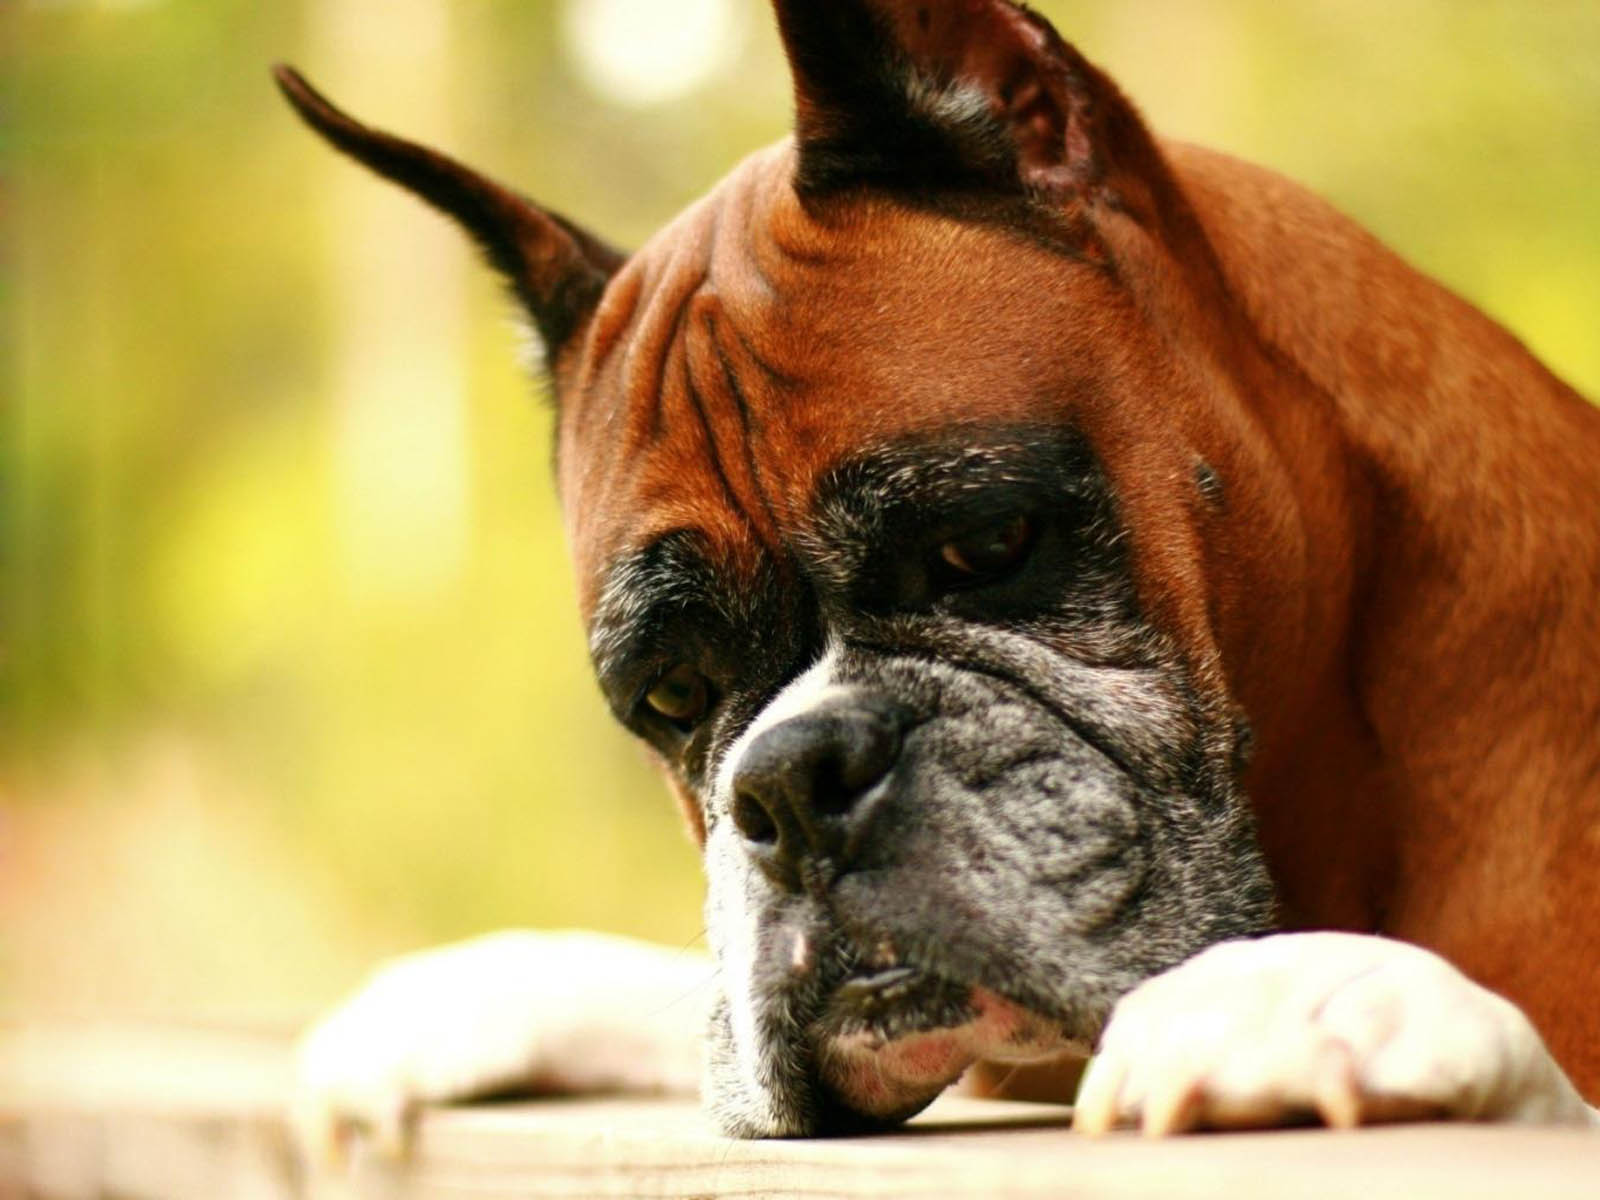 Tag Boxer Dog Wallpapers Images Photos Pictures and Backgrounds 1600x1200